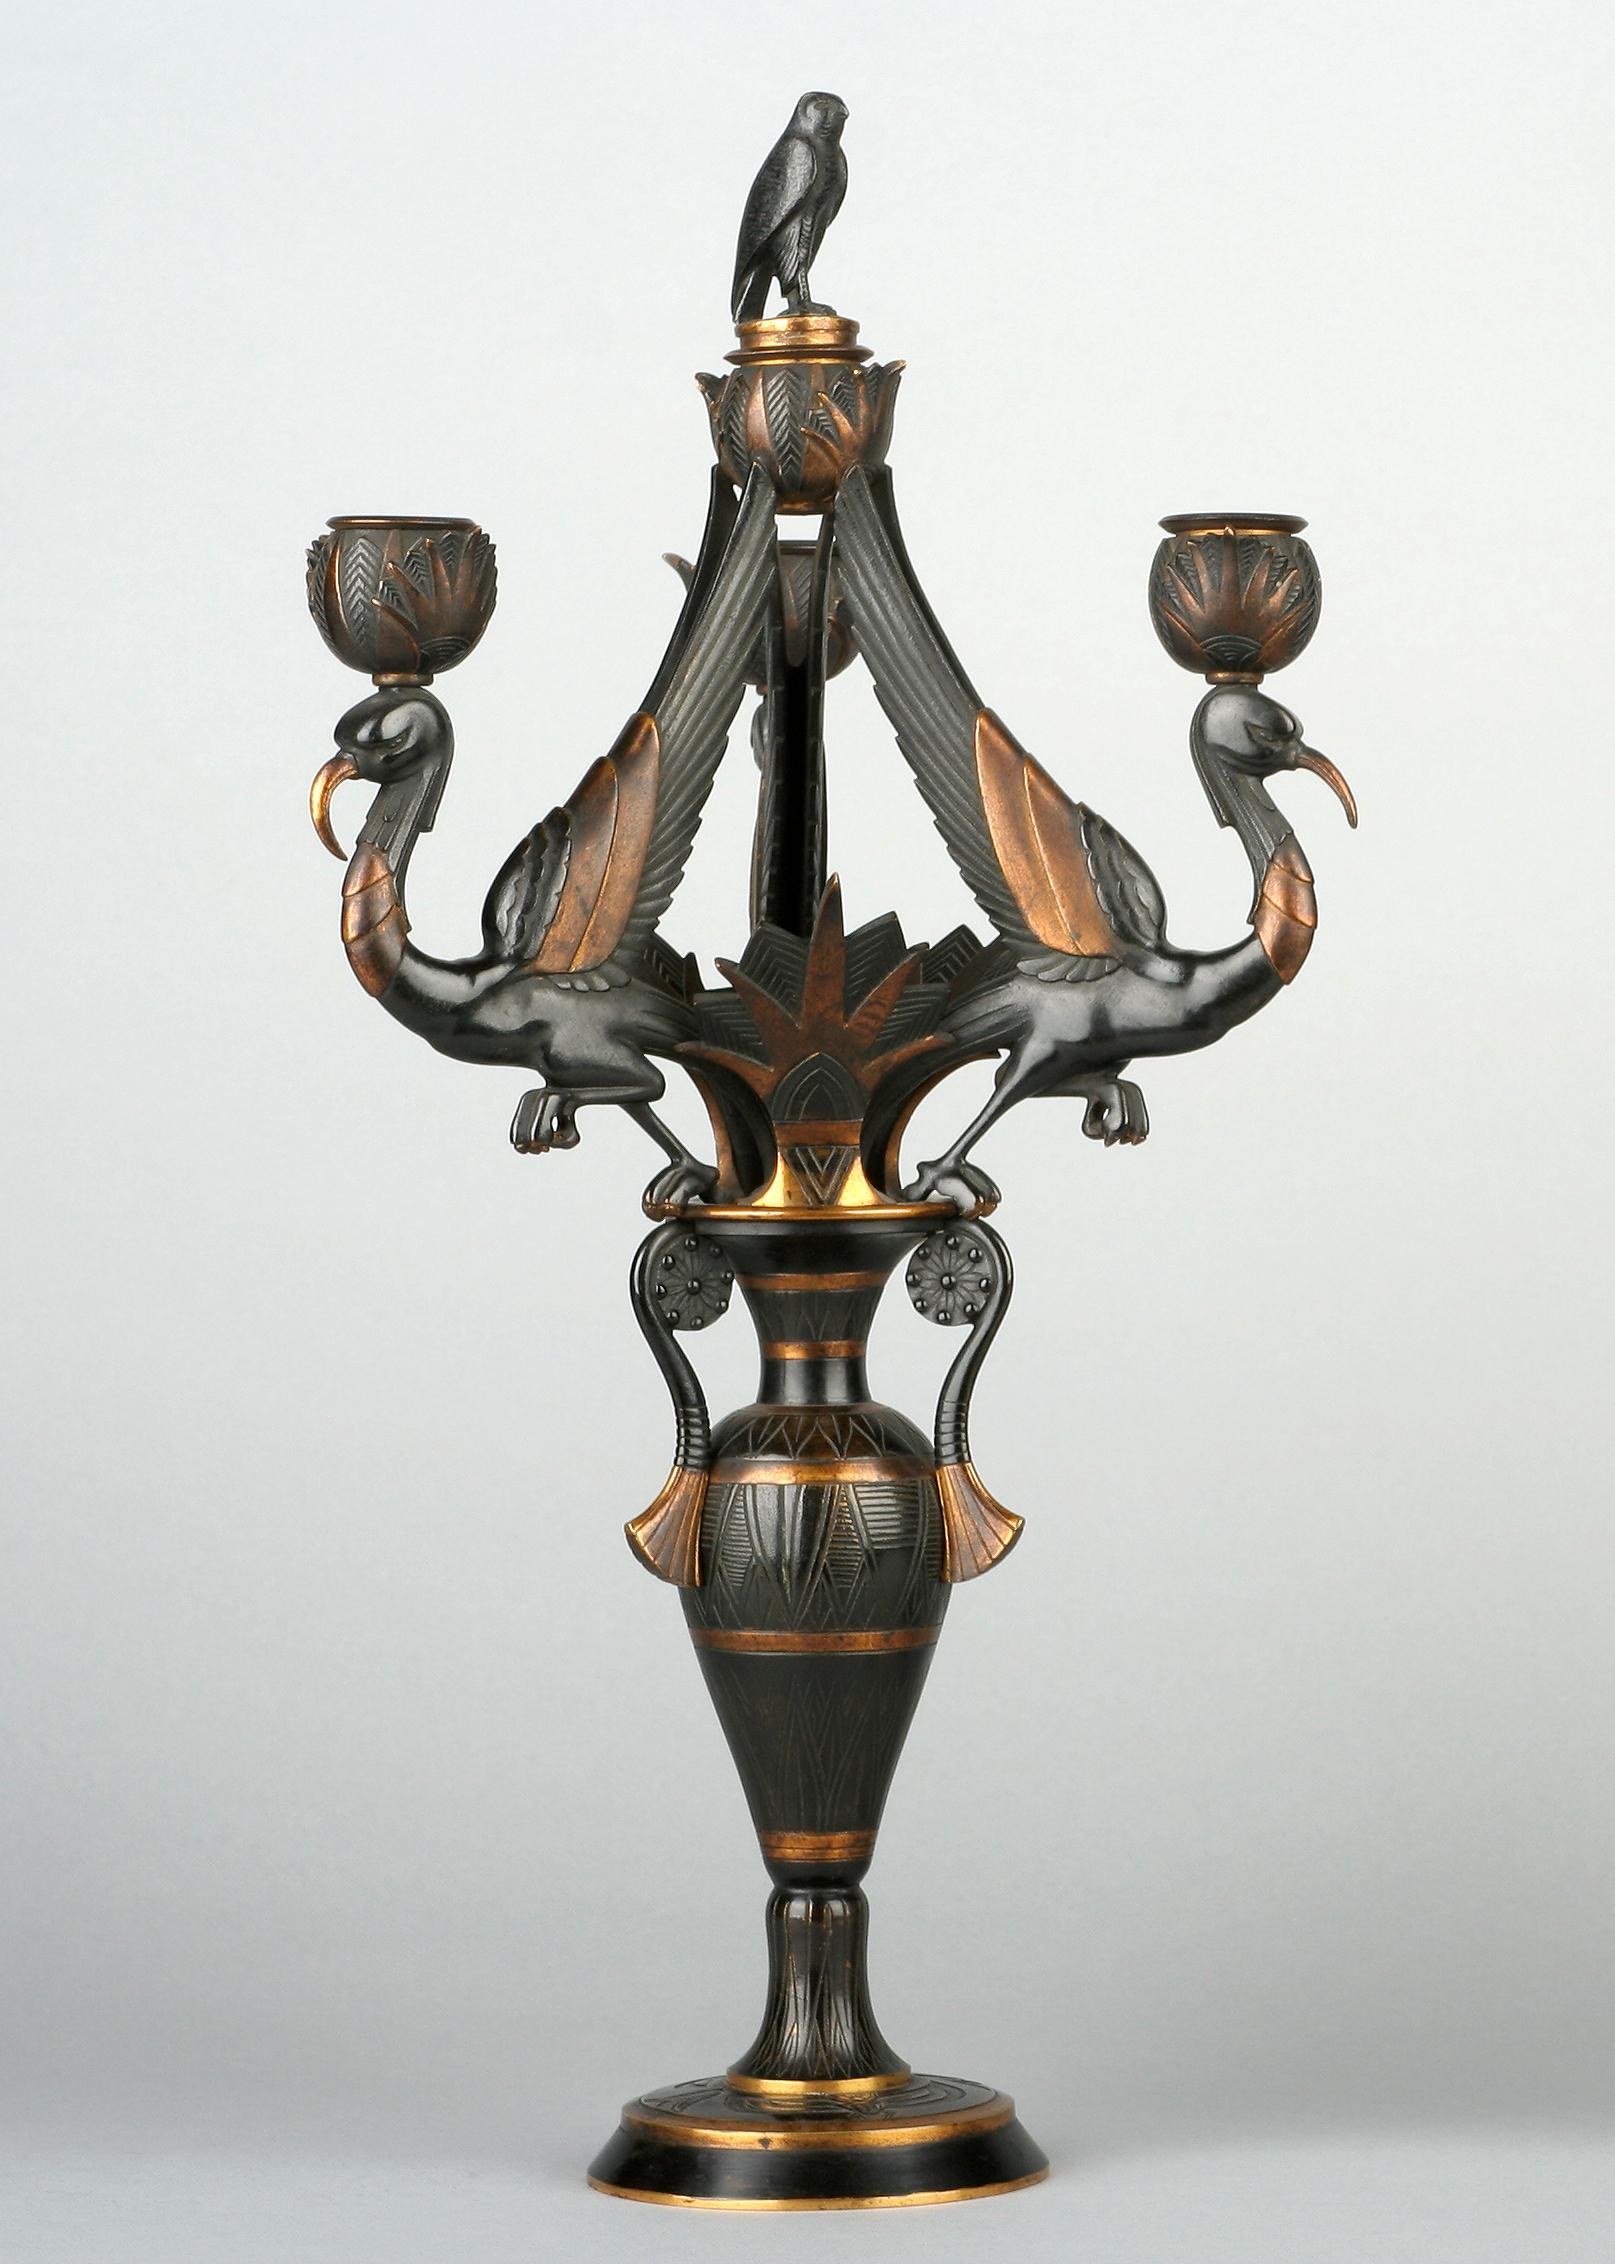 Rare pair of Egyptian style candelabras attributed to G. Servant, made in two patina bronze. Cast in form of an antique vase surmounted by three leaned ibis birds, each topped by a light nozzle. Decorated with lotus flower, winged beetles and